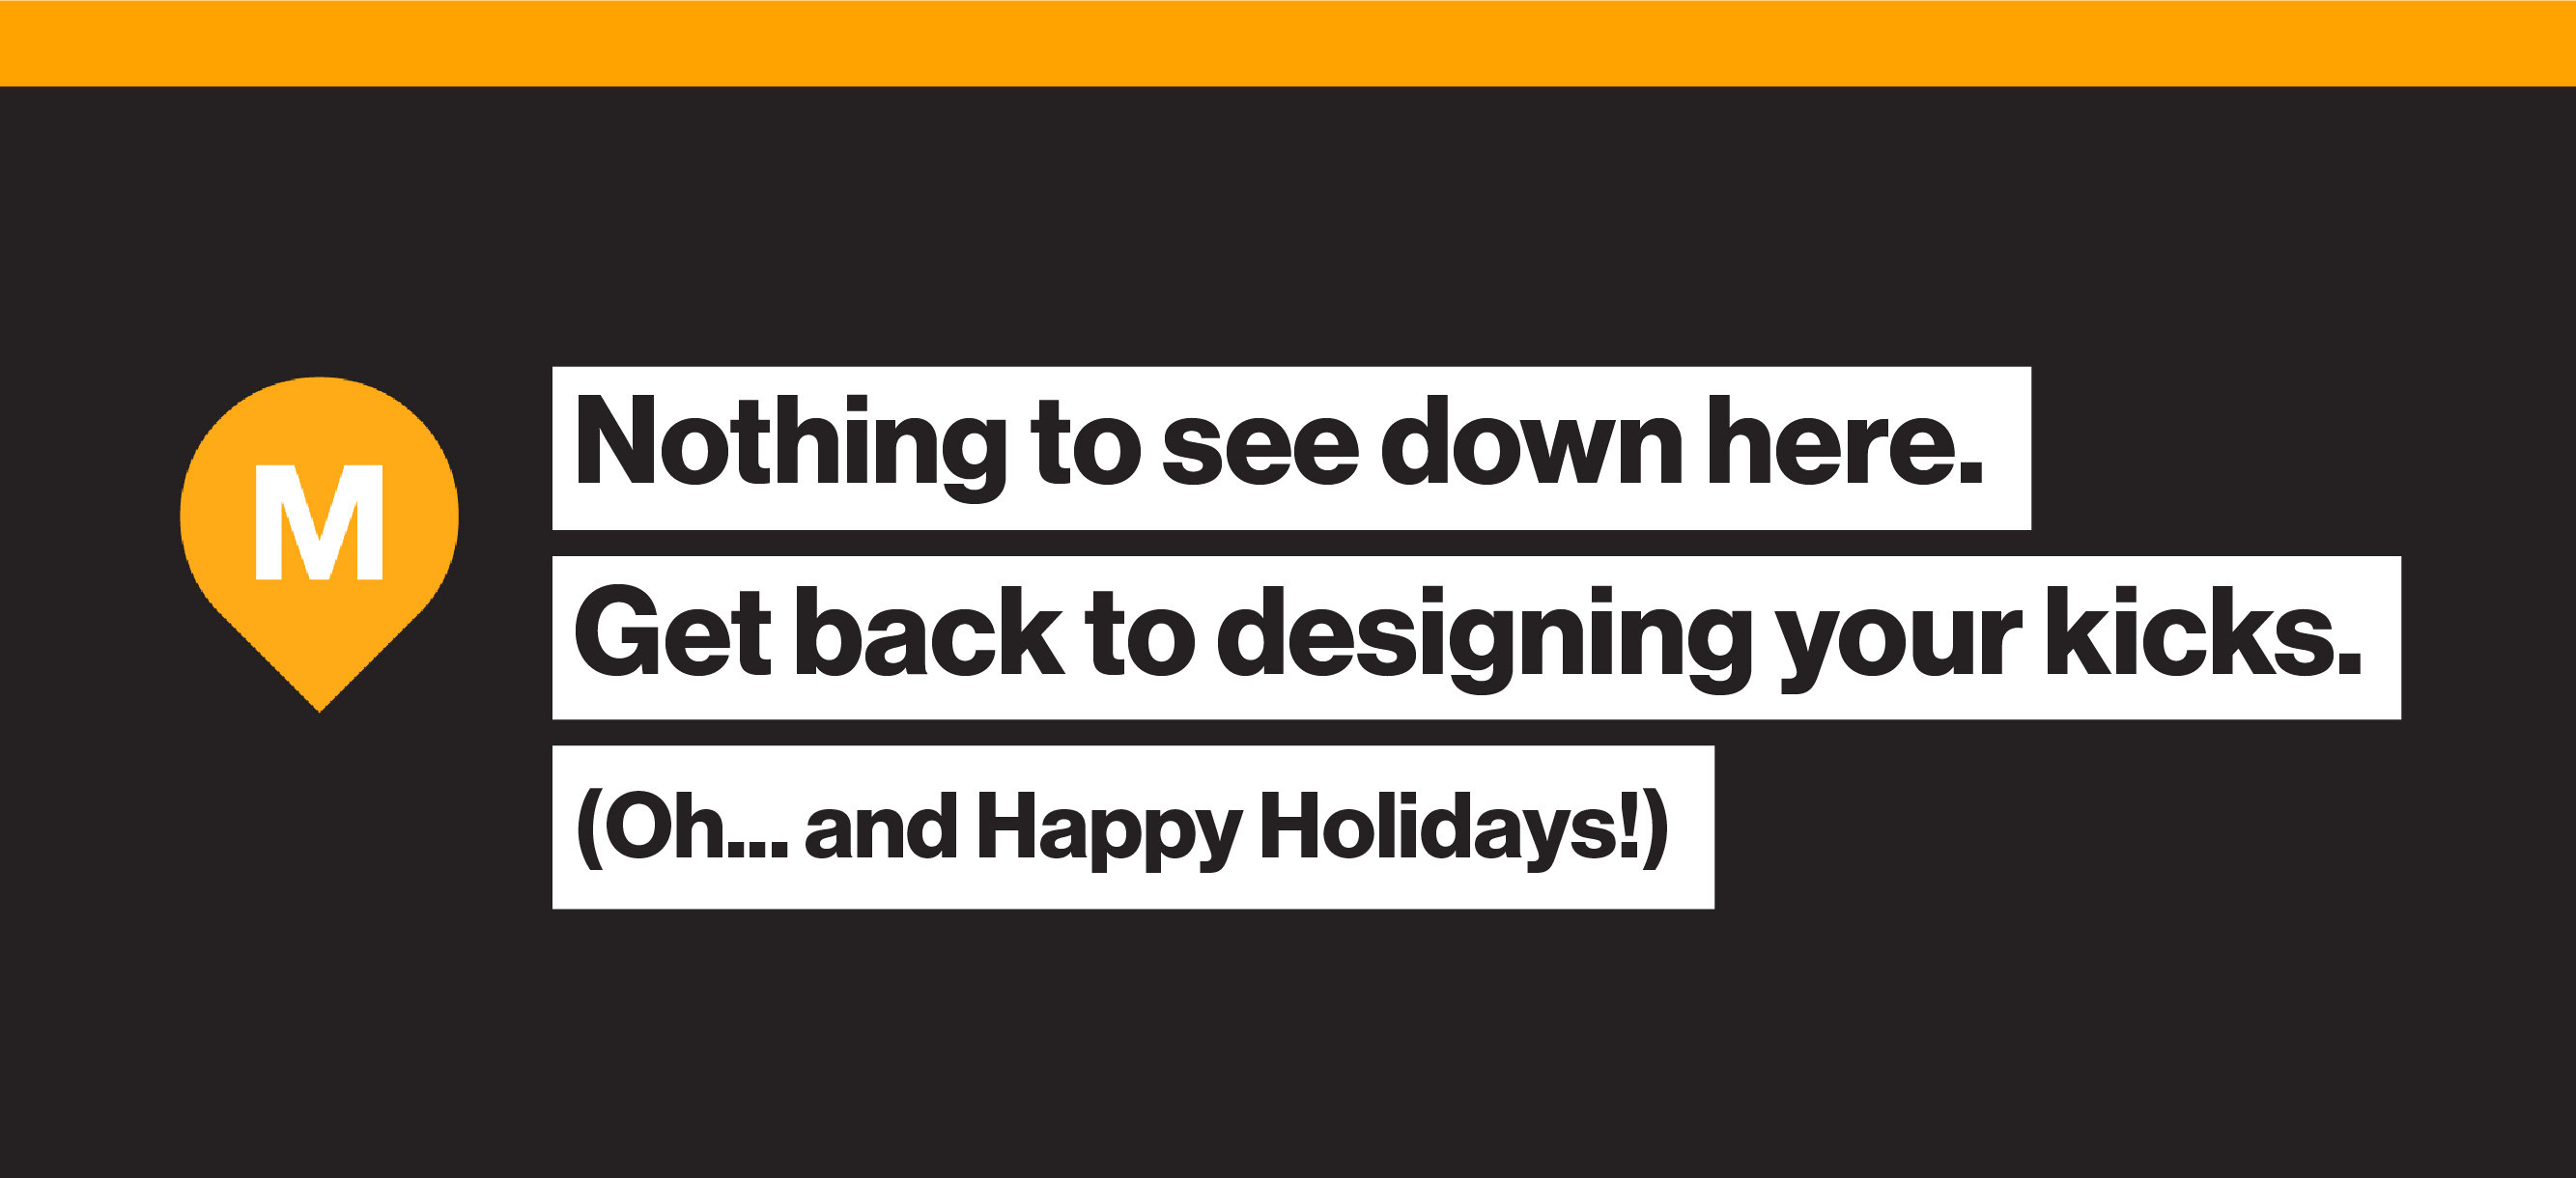 Nothing to see down here. Get back to designing your kicks. Oh...and Happy Holidays